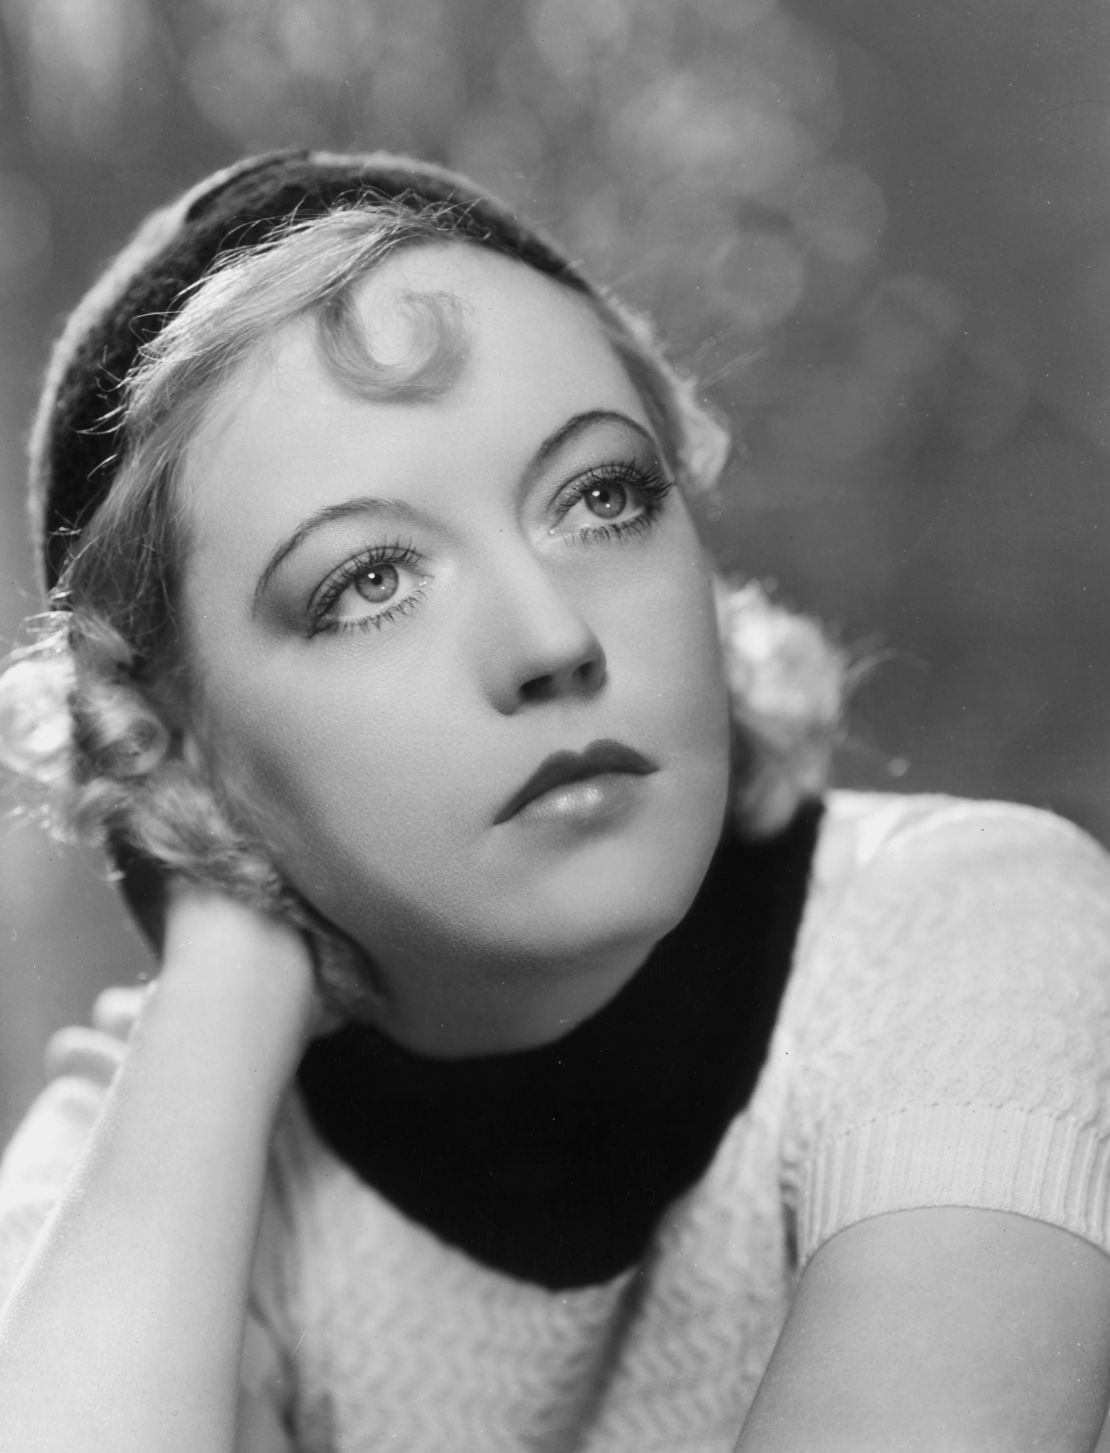 Trish Summerville was tasked with emulating the looks of Old Hollywood stars like Marion Davies.